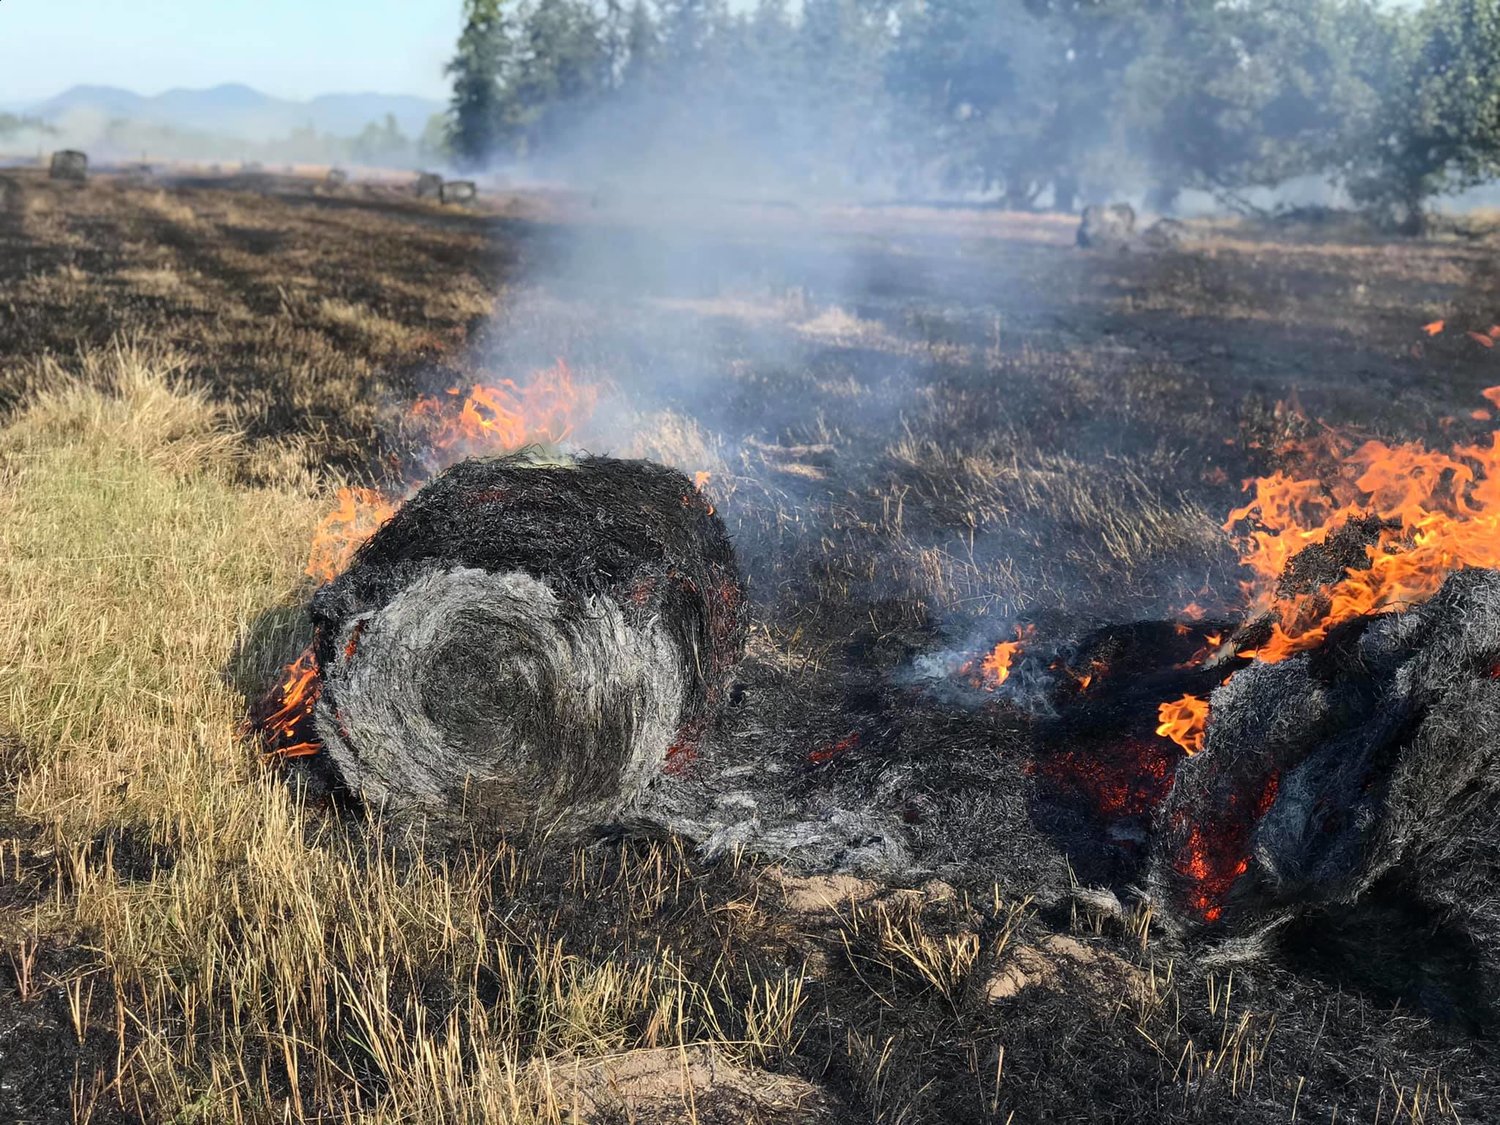 Bales of hay burned during the July 4 wildfire near Yelm.